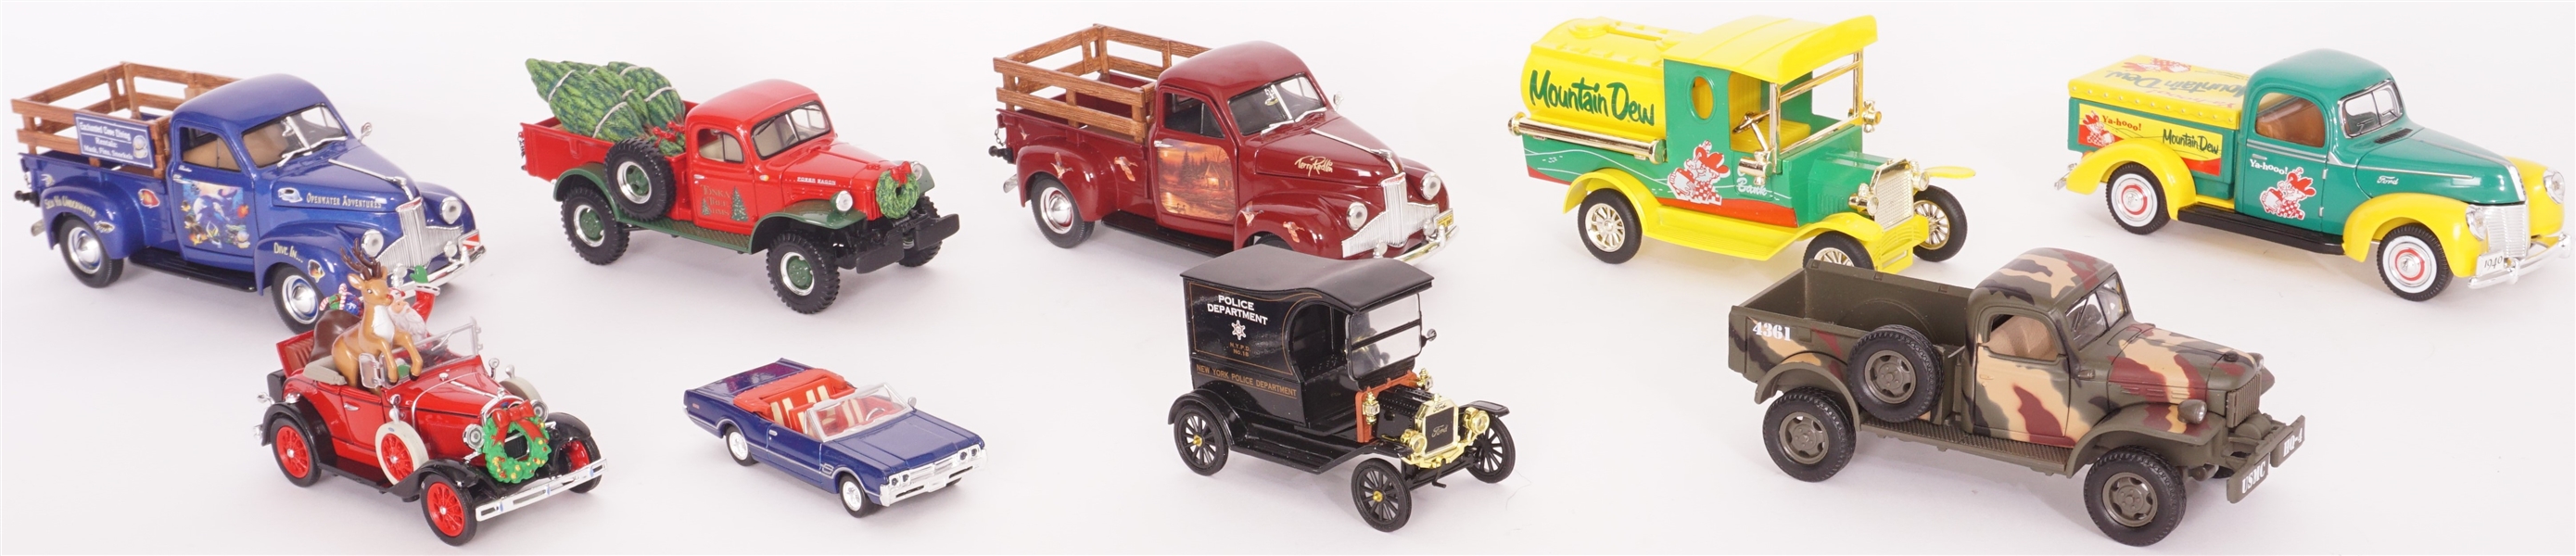 Collection of 9 Limited Edition Model Cars & Trucks w/ Original Boxes